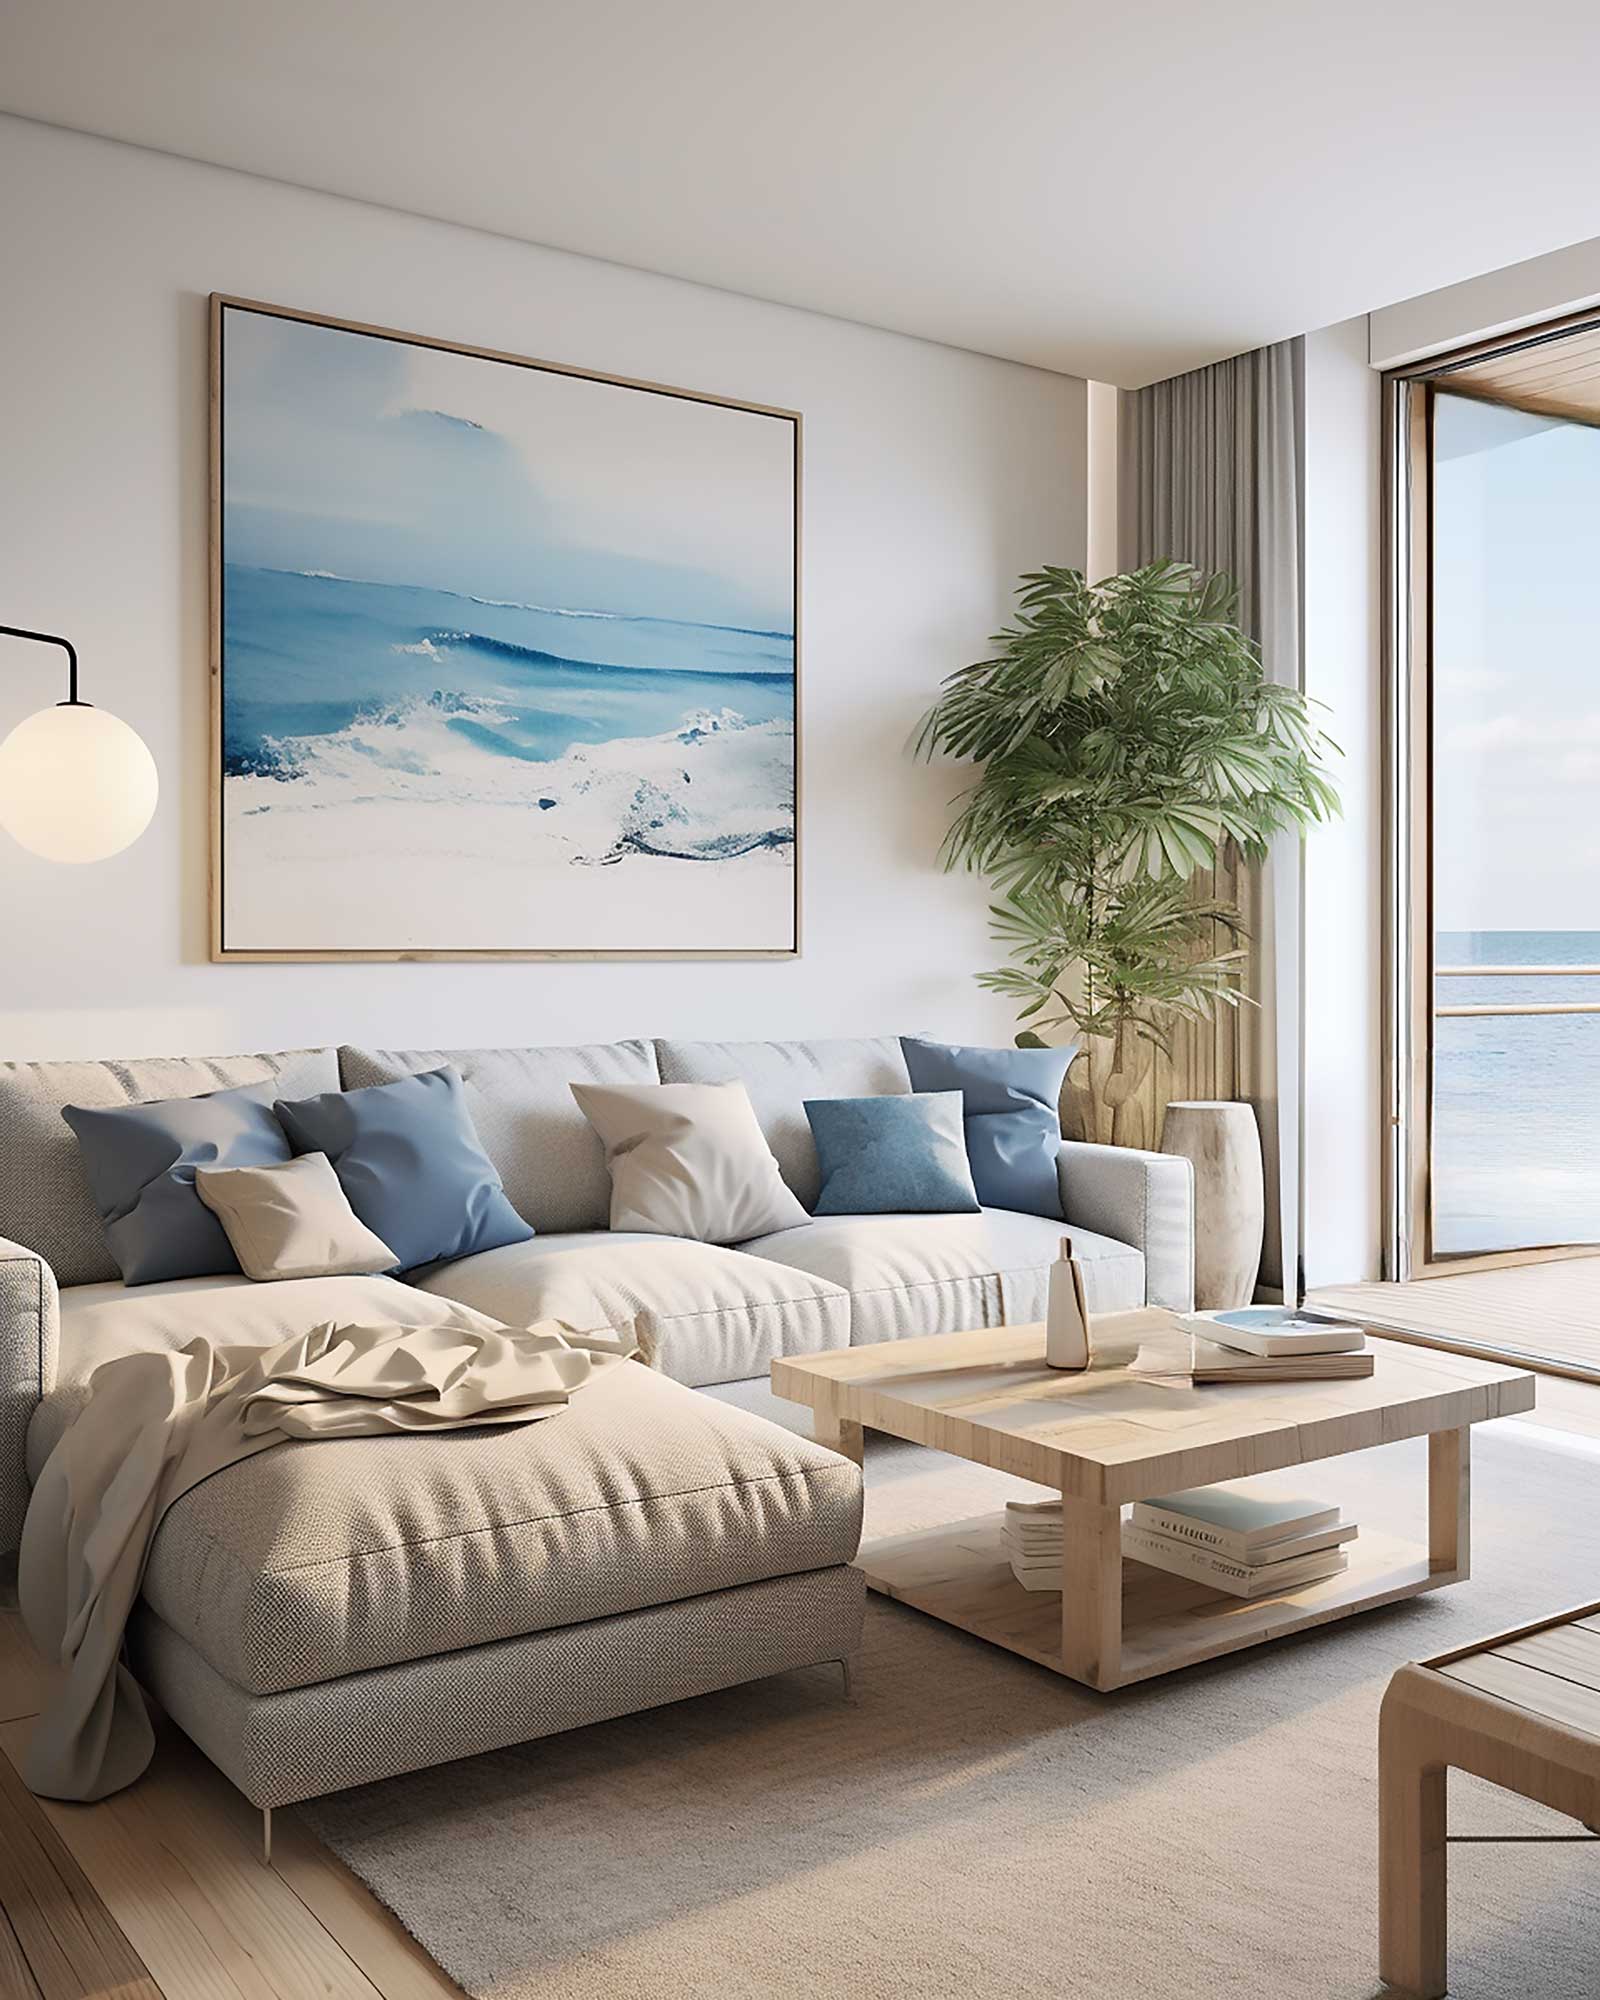 Luxury beach apartment living room with a sweeping ocean view, adorned in hues of white, reflecting a clean-lined, contemporary and modular design.